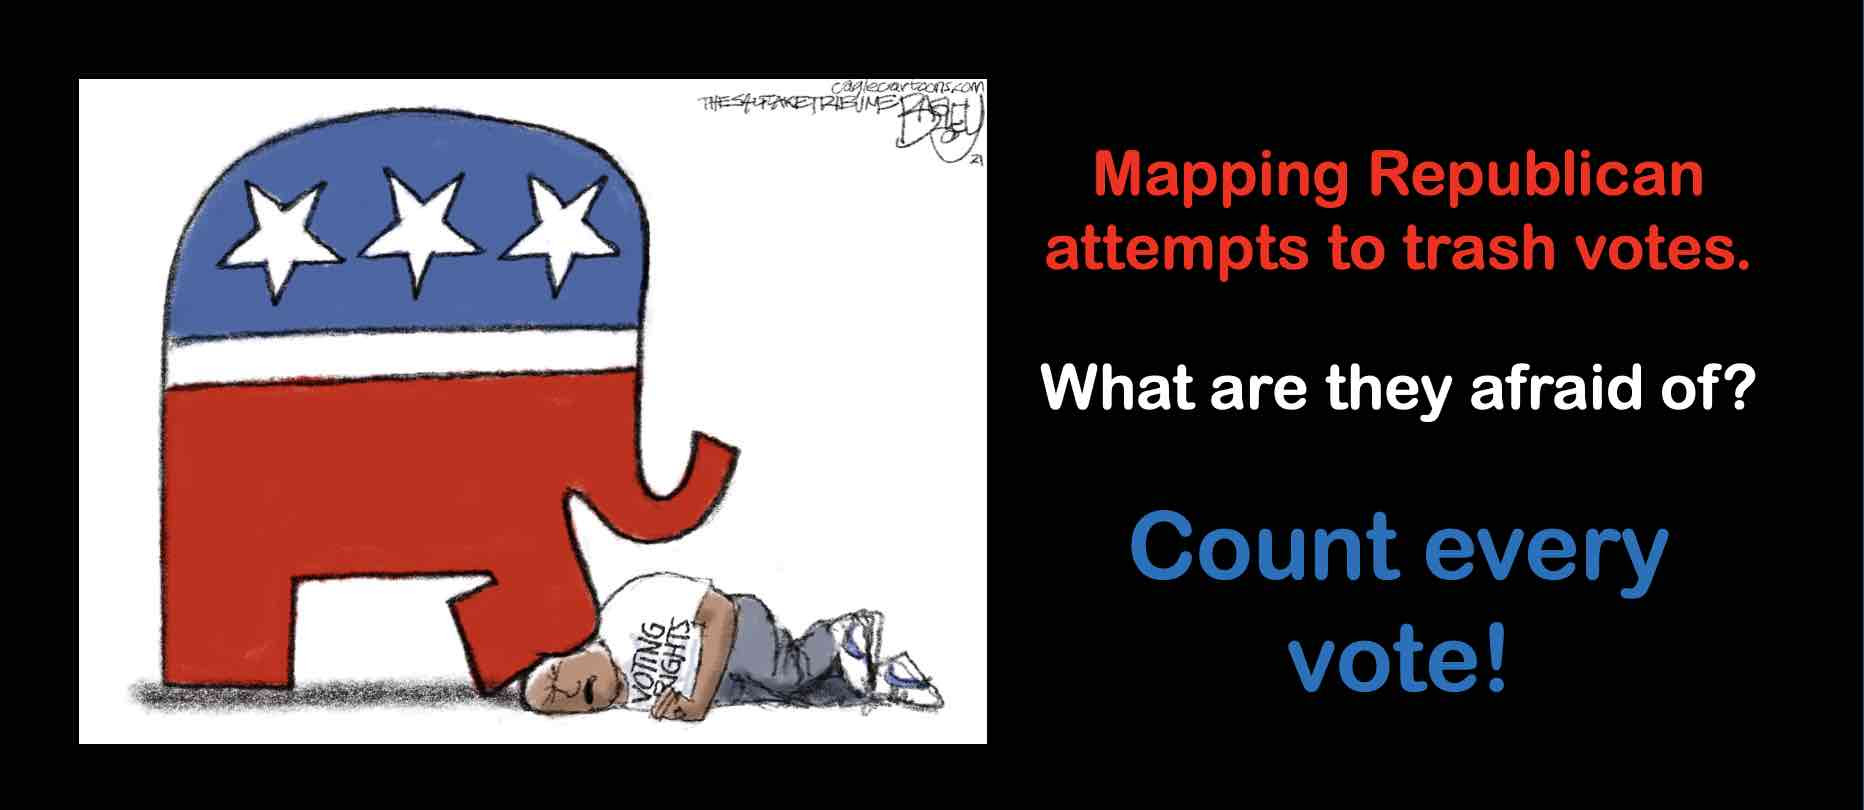 Mapping Republican attempts to trash votes. Count every vote!